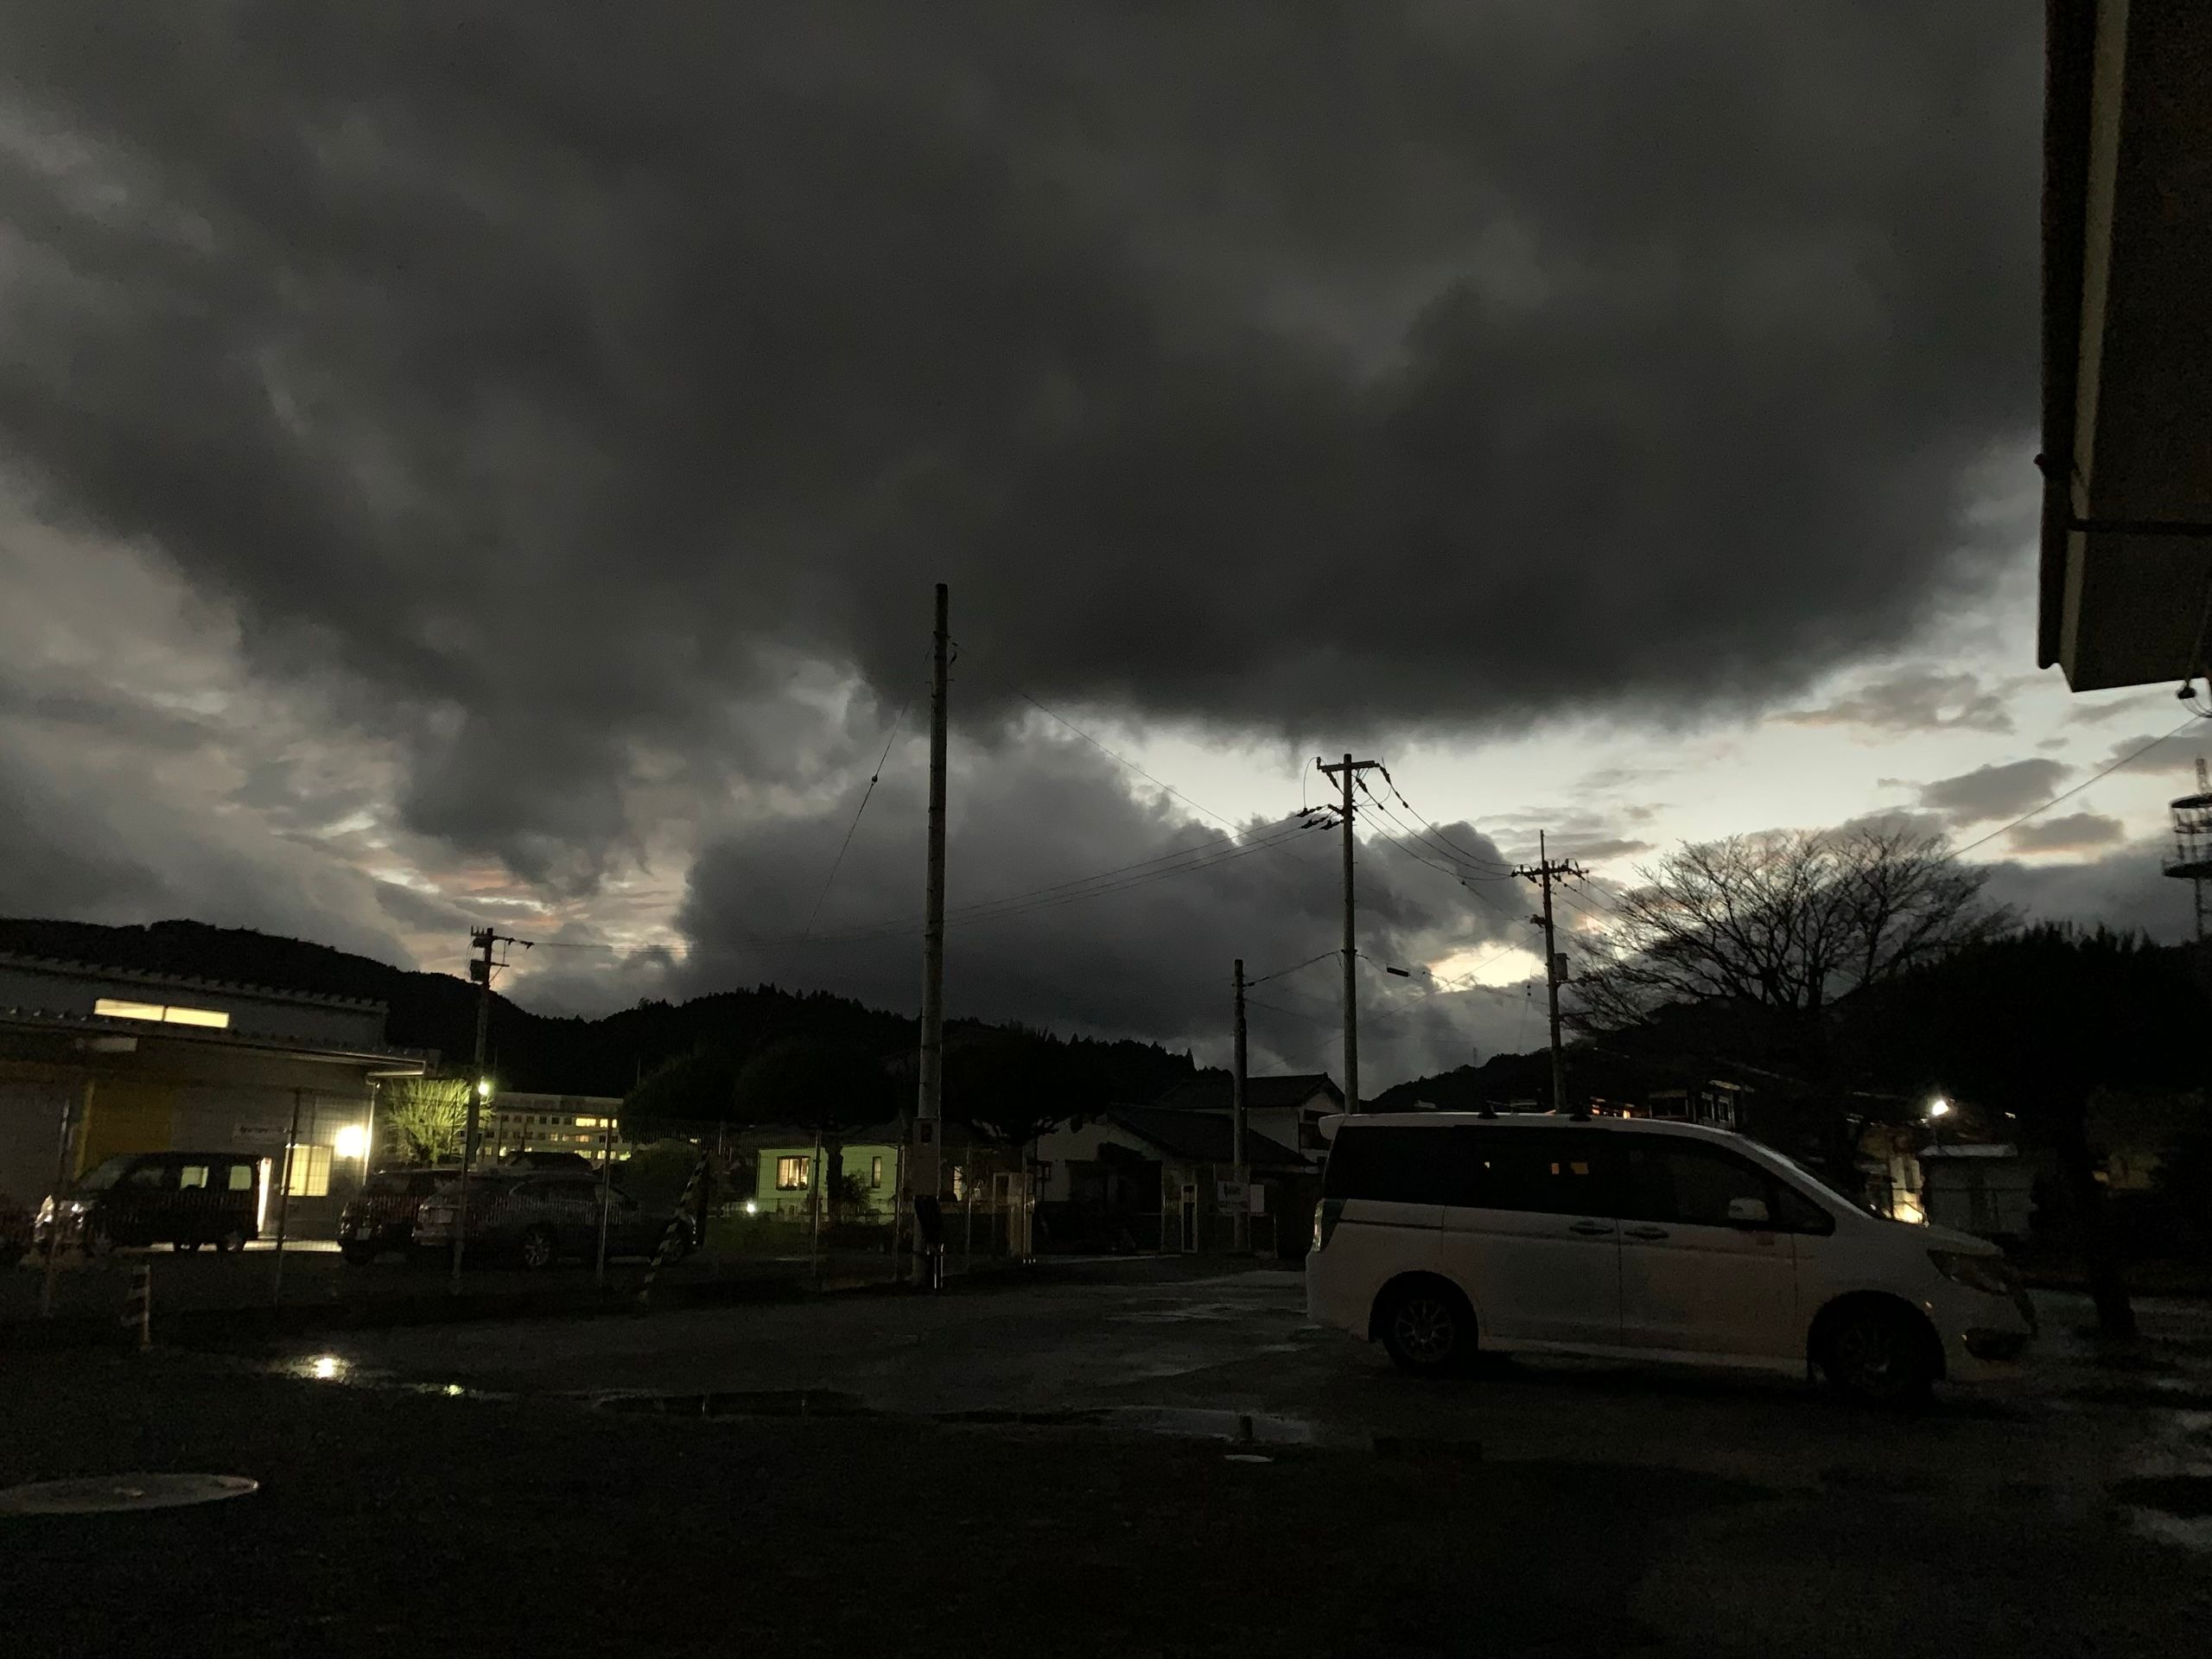 Very dark, almost black clouds above a parking lot at dusk.